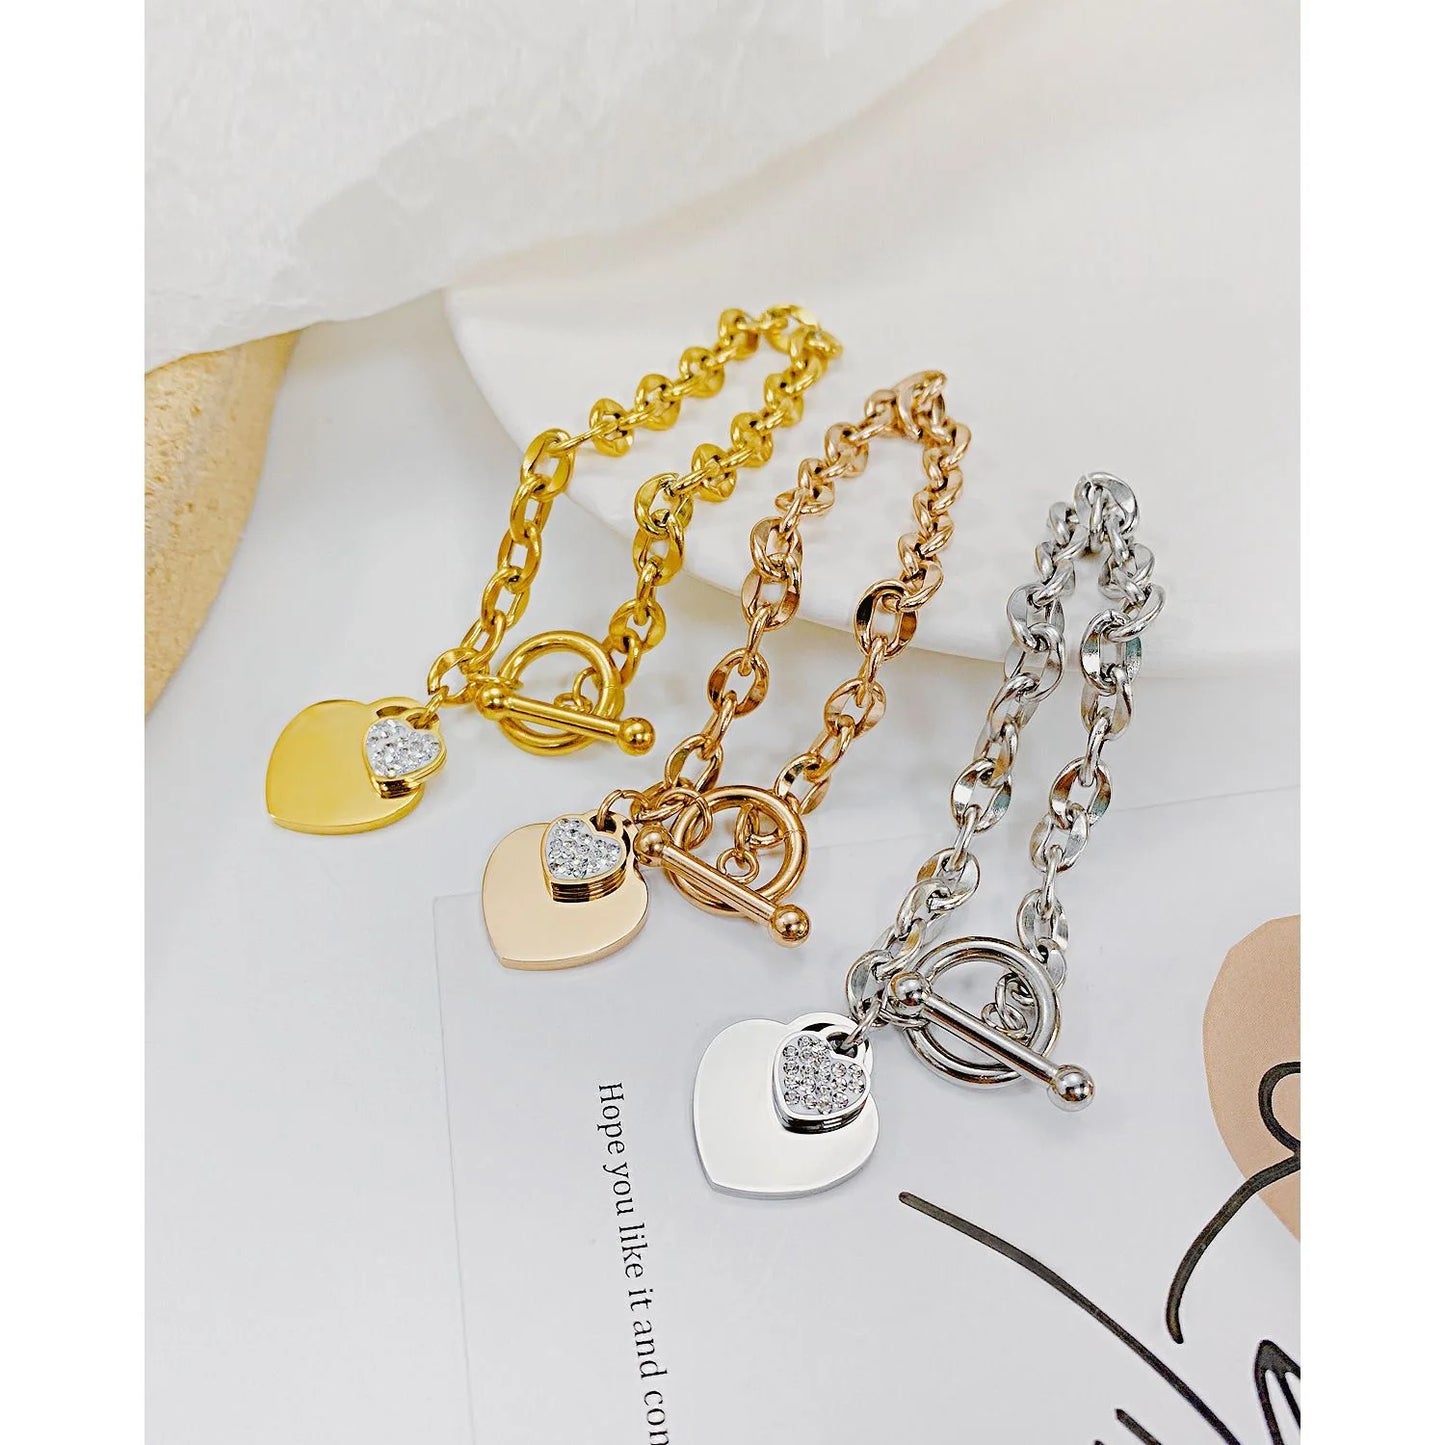 Explore our collection of waterproof geometric heart pendant bracelets and bangles for women and girls. Crafted from 316L stainless steel and plated with gold, these accessories are designed to retain their shine and shape over time